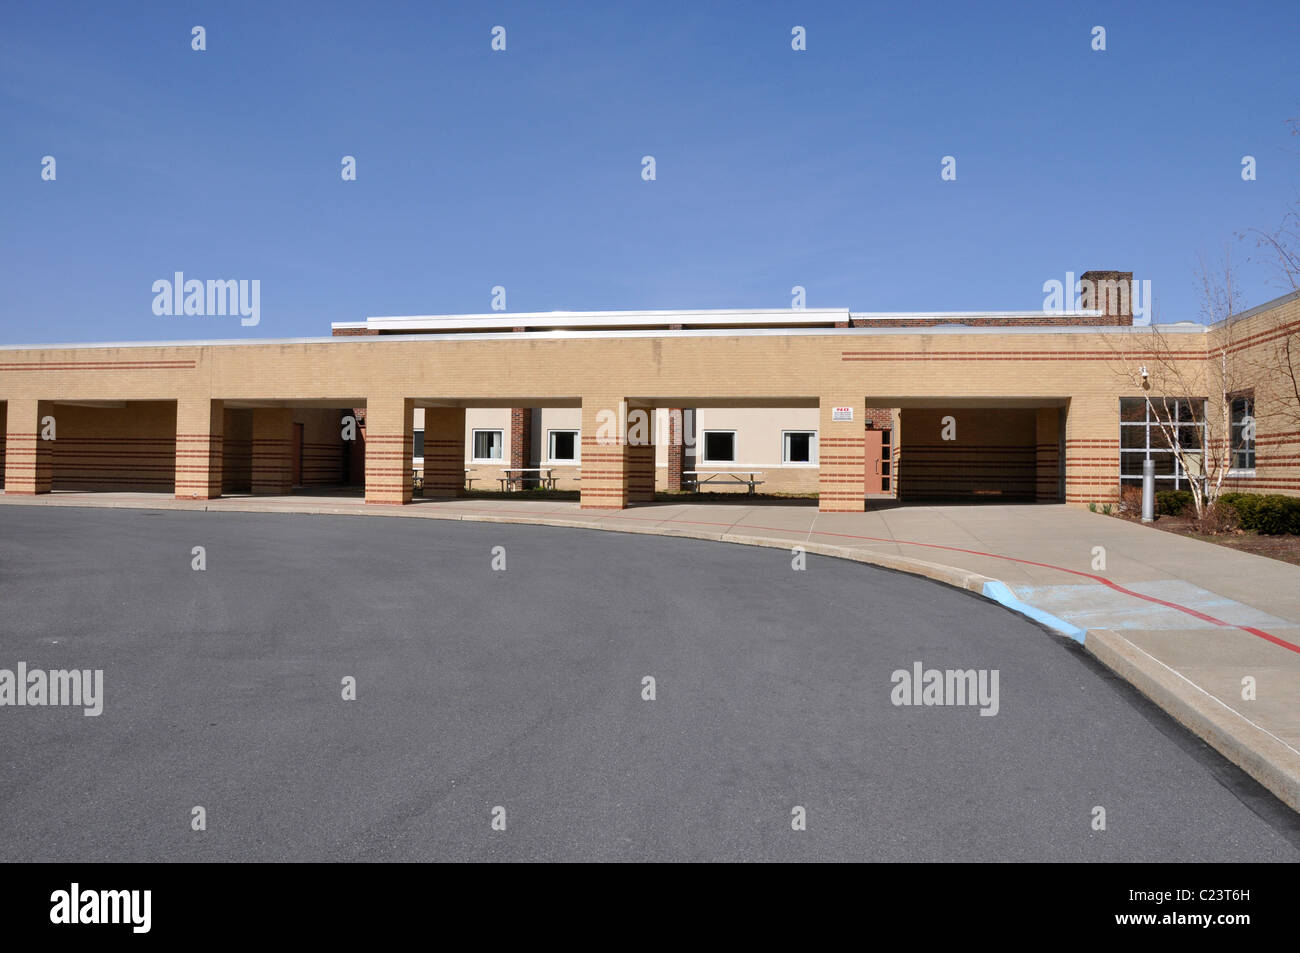 Exterior of a modern school building Stock Photo